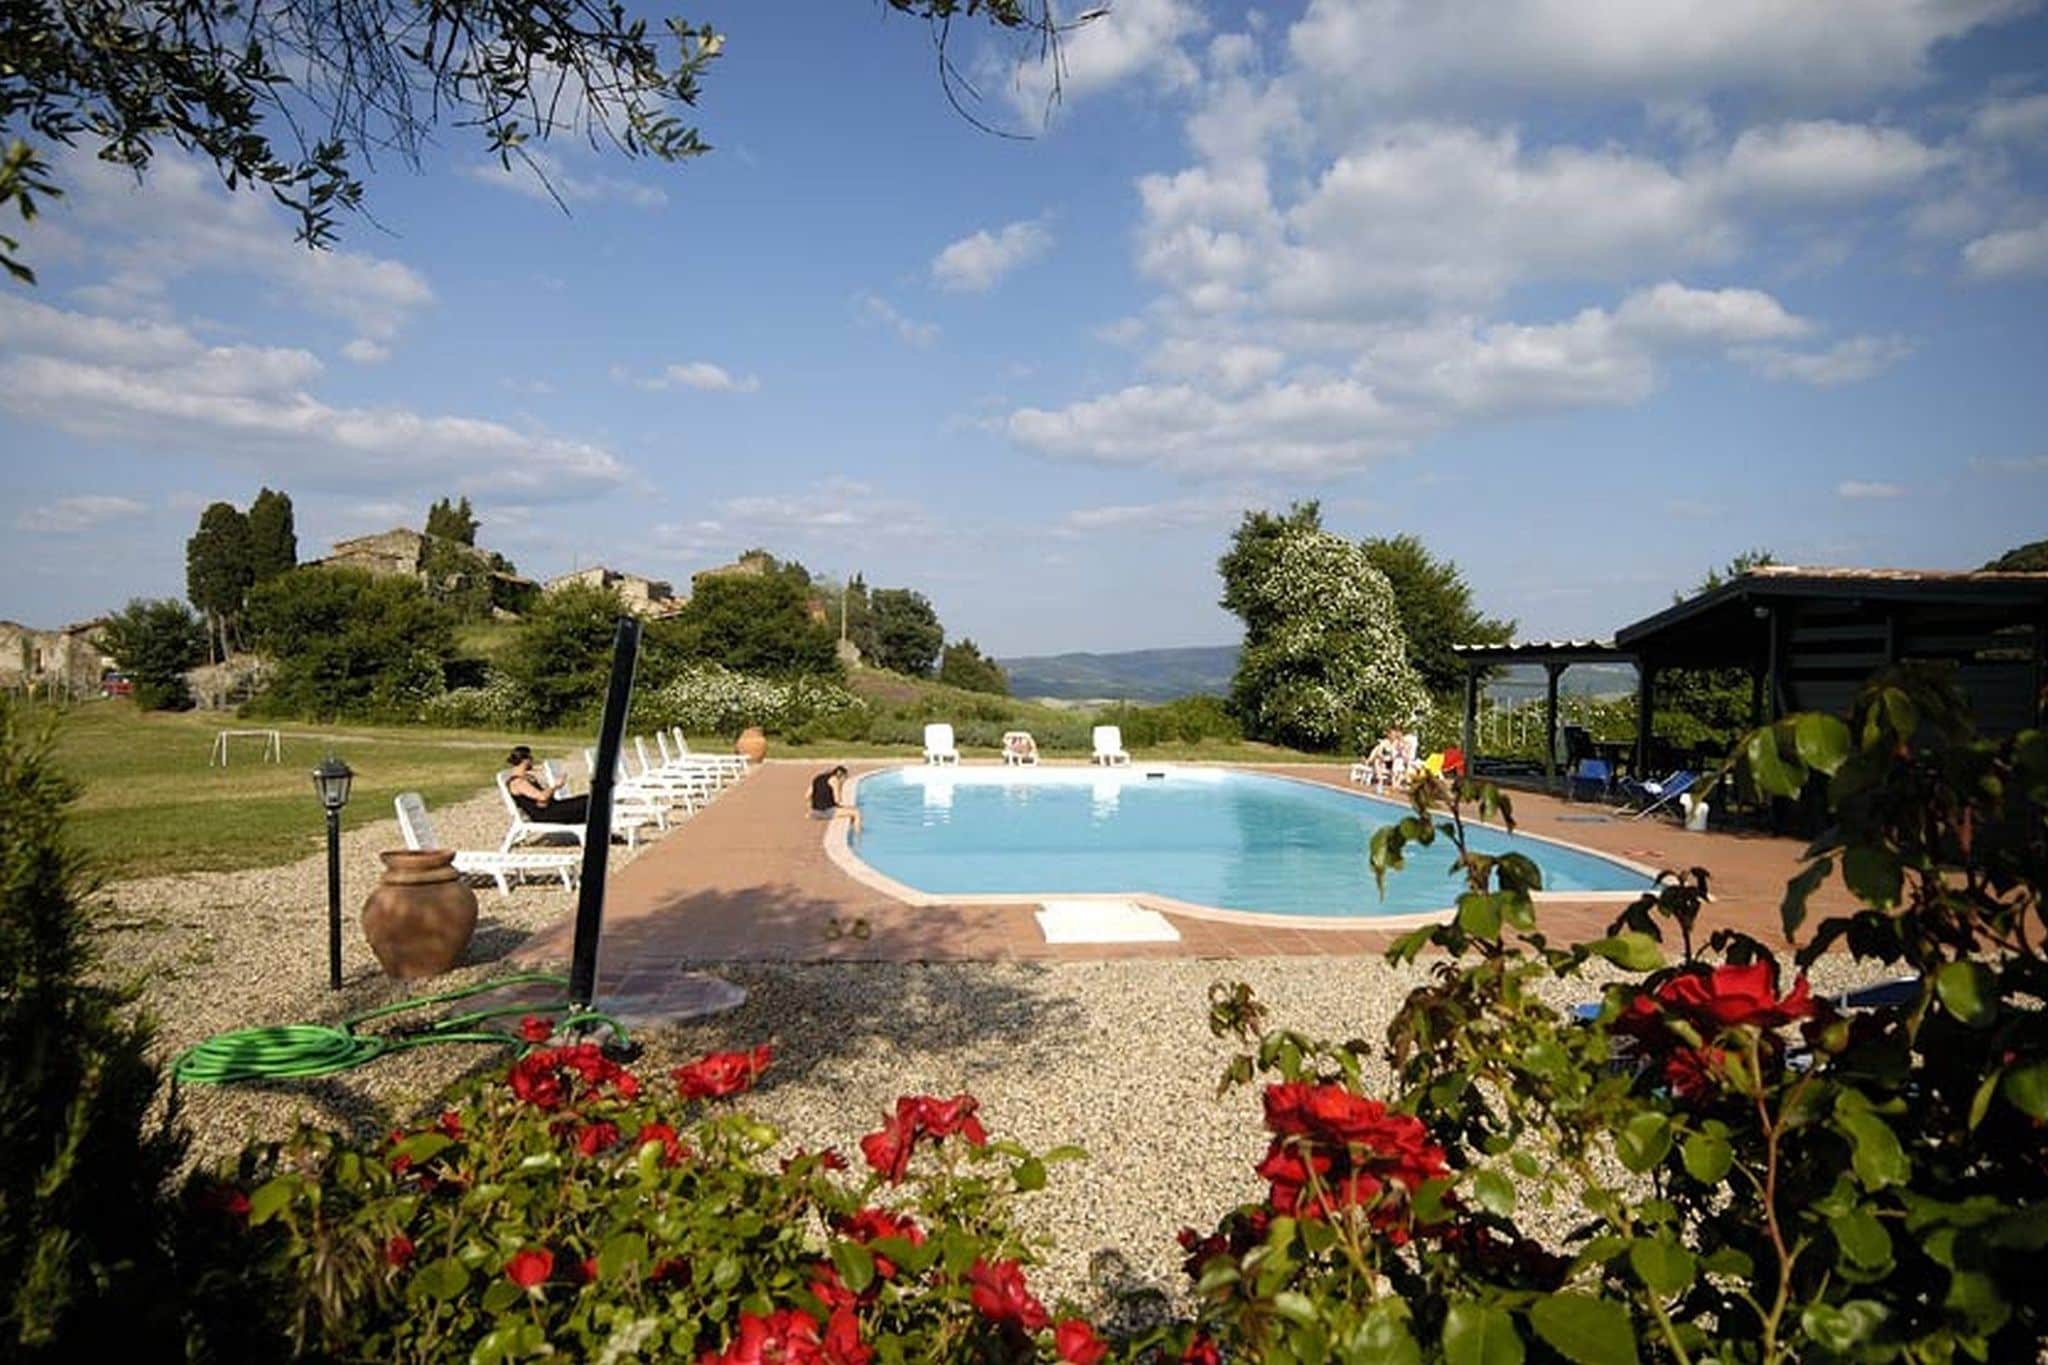 Apartment in a wonderful Agriturismo in a medieval village on the Tuscan hills